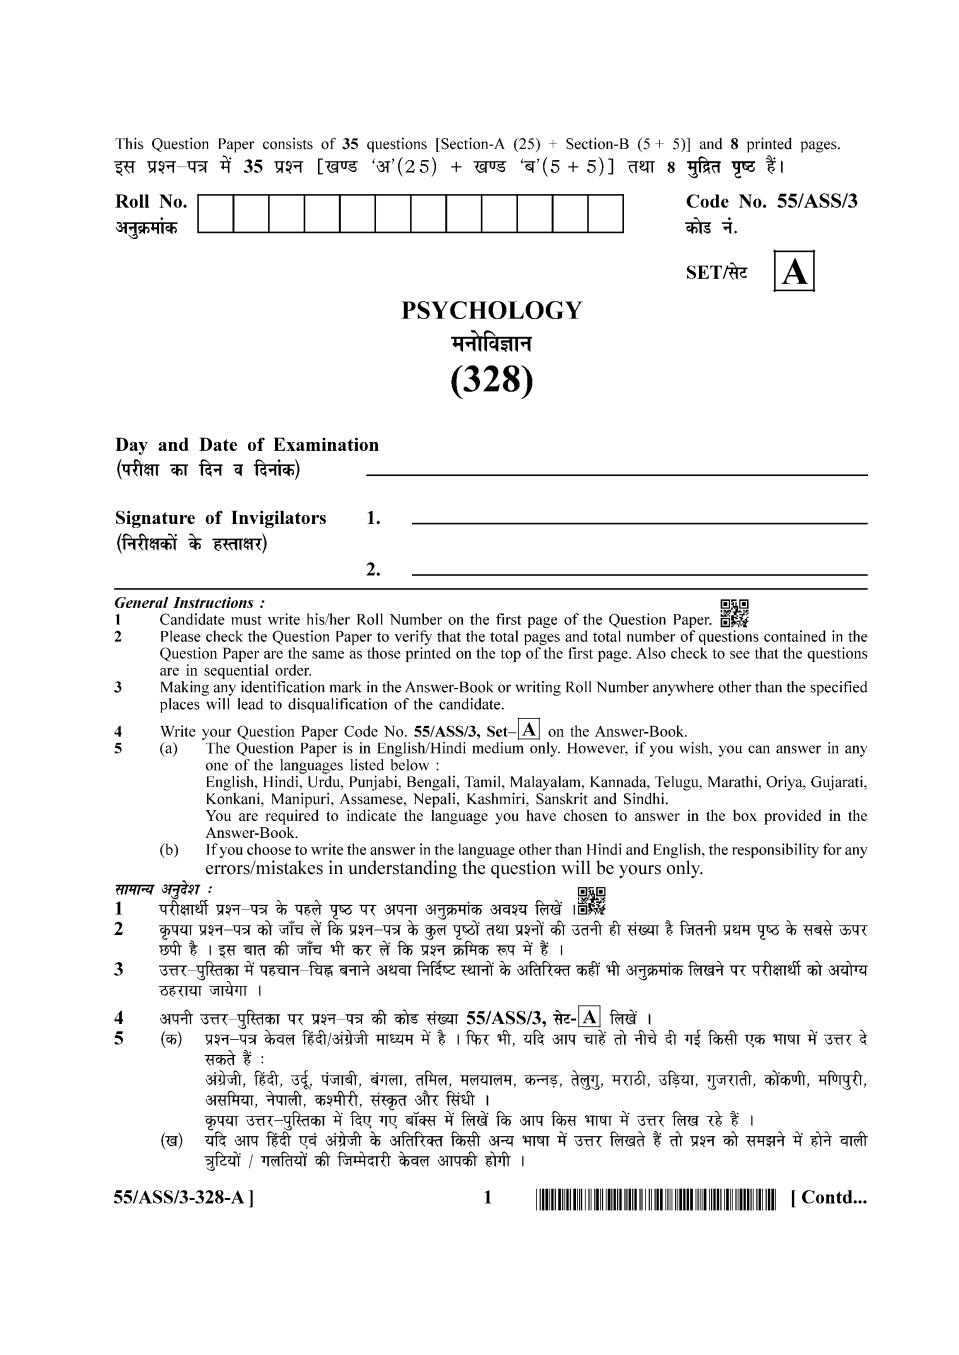 NIOS Class 12 Question Paper Oct 2017 - Psychology - Page 1